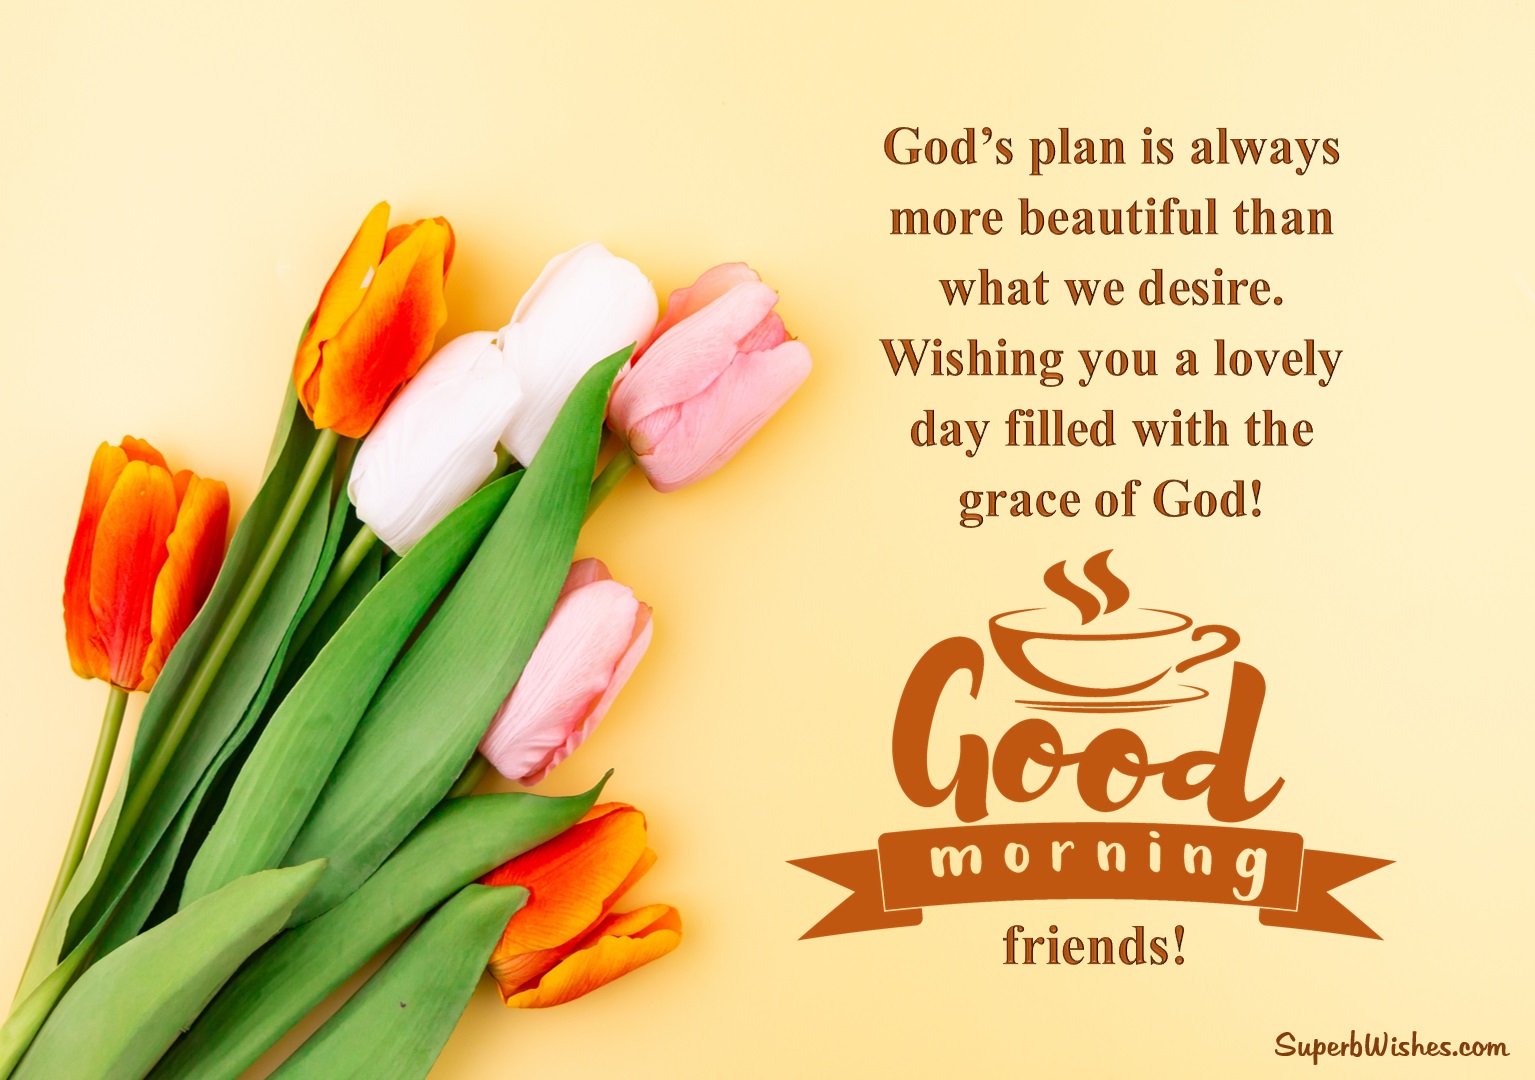 Good Morning Wishes For Friends Images - God's Grace | SuperbWishes